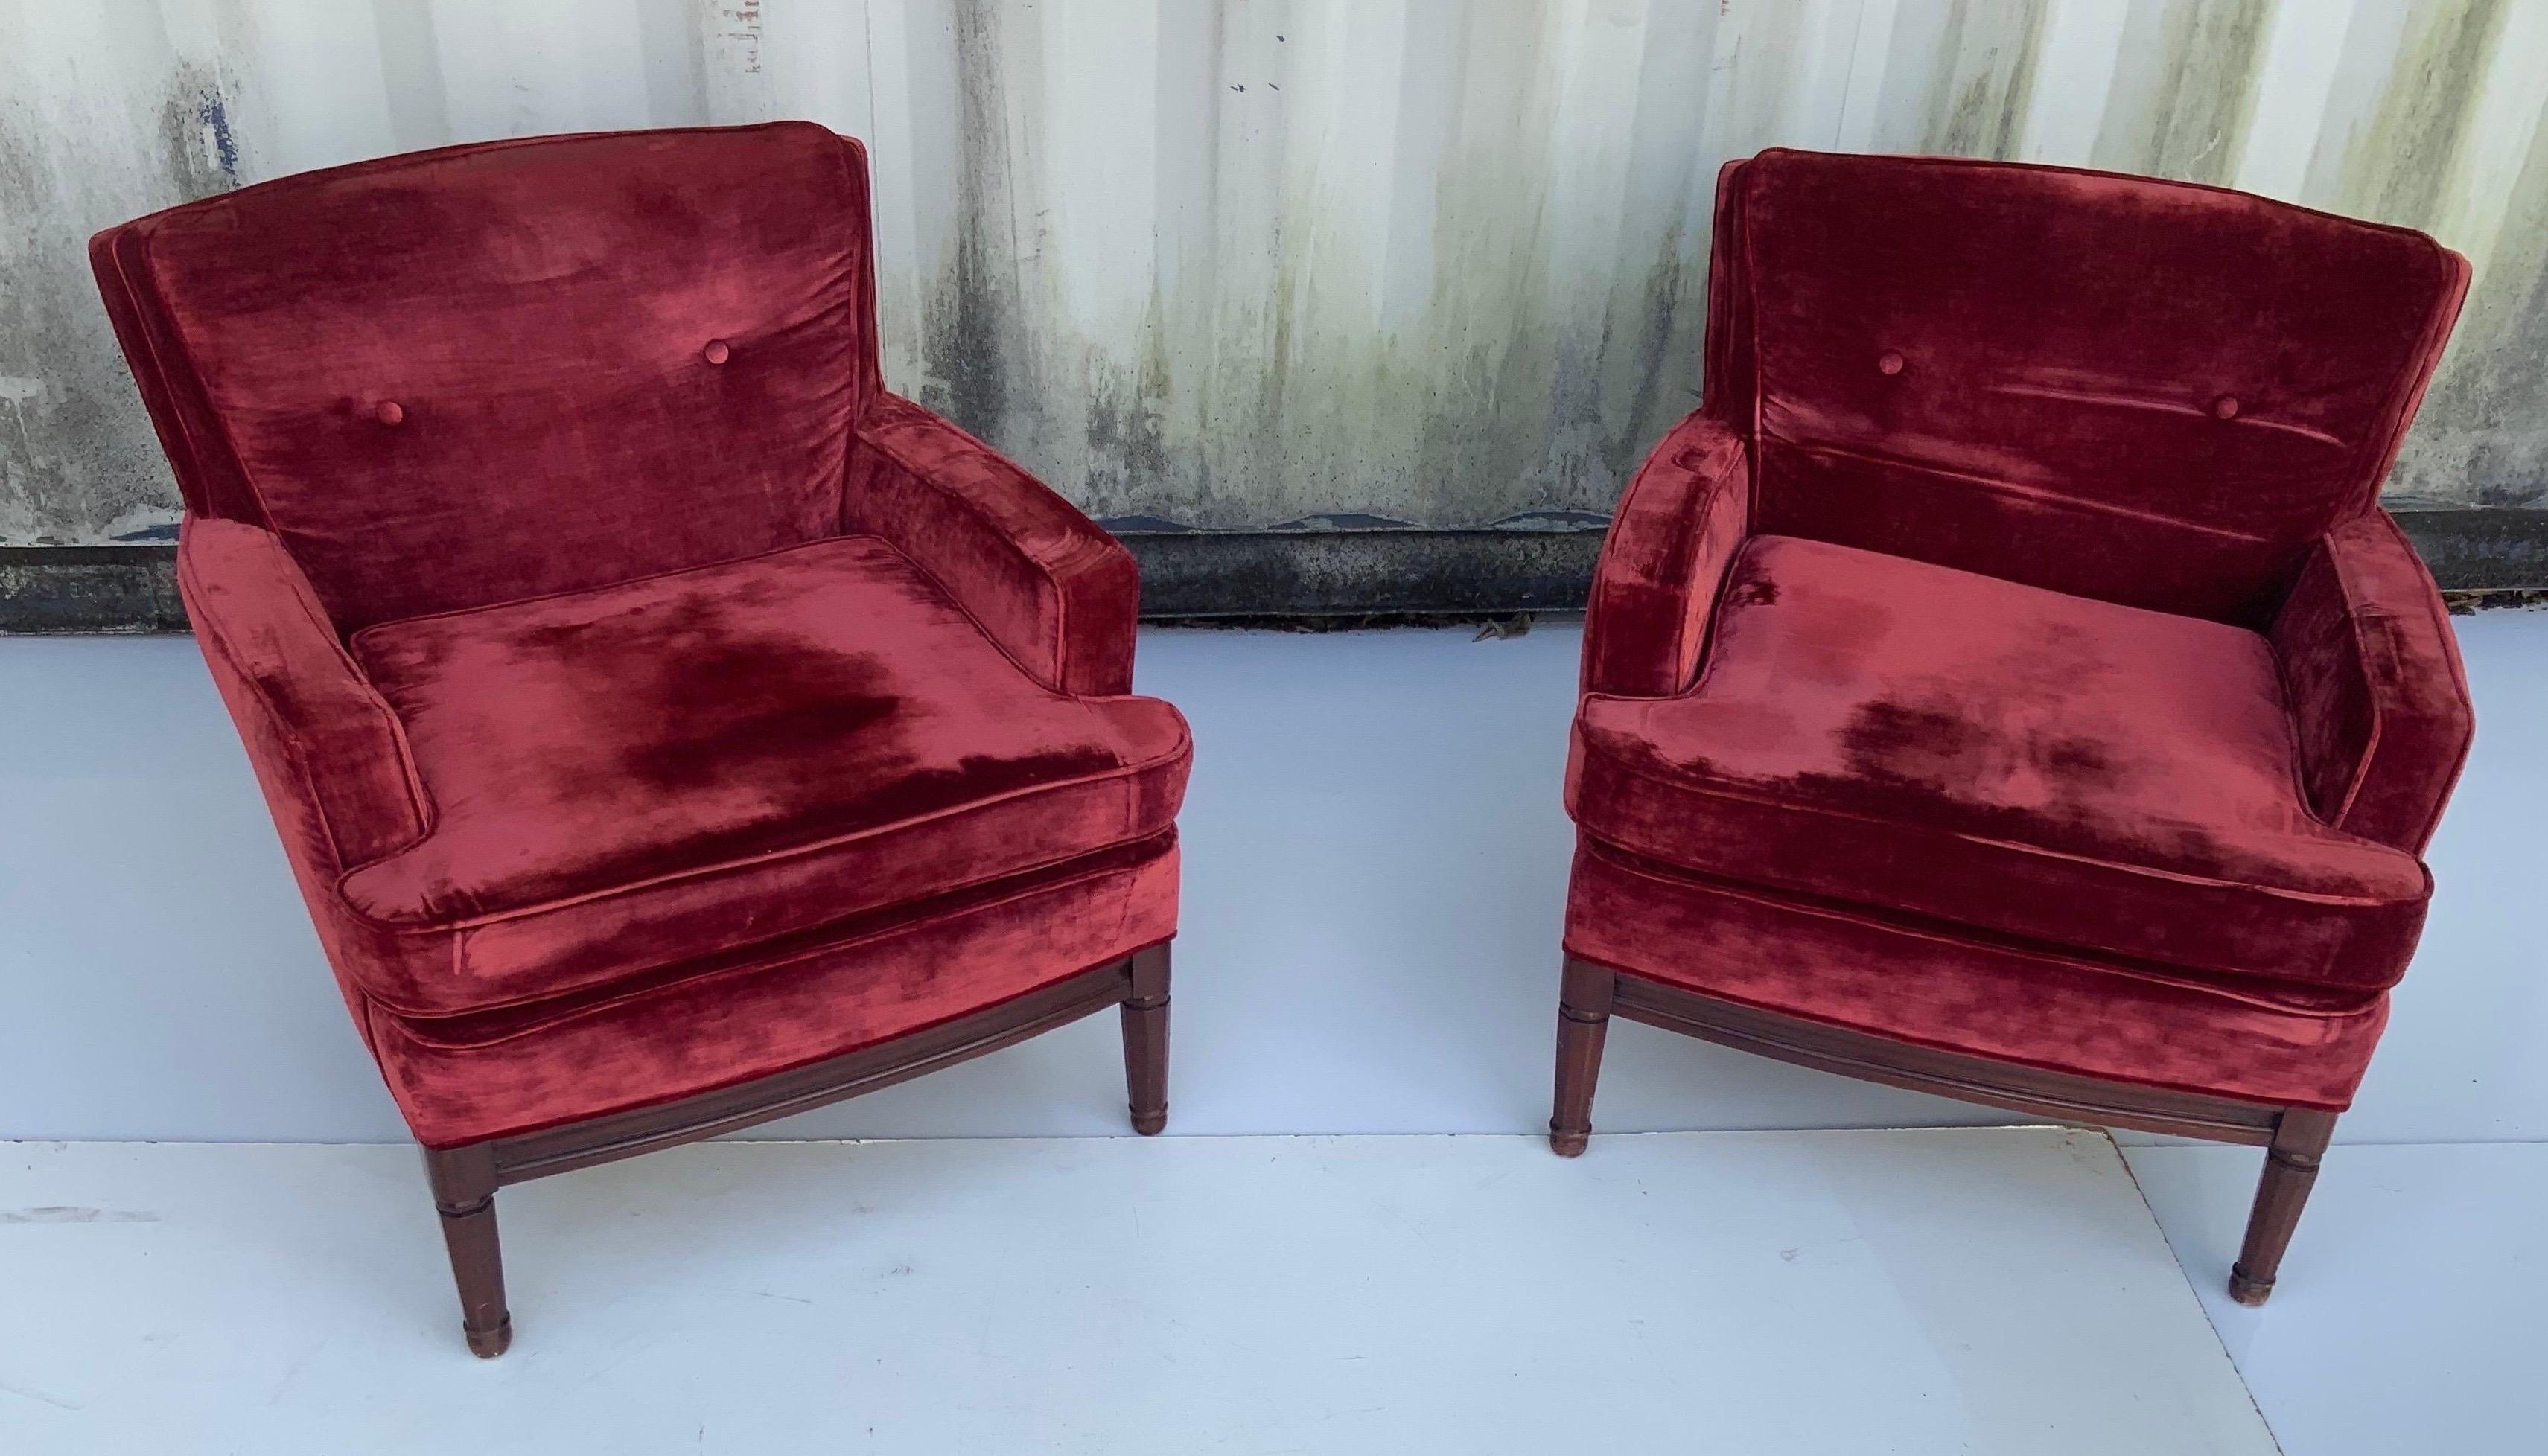 French Pair of Neoclassical Maison Jansen Lounge Chairs circa 1960, 2 Pairs Available For Sale